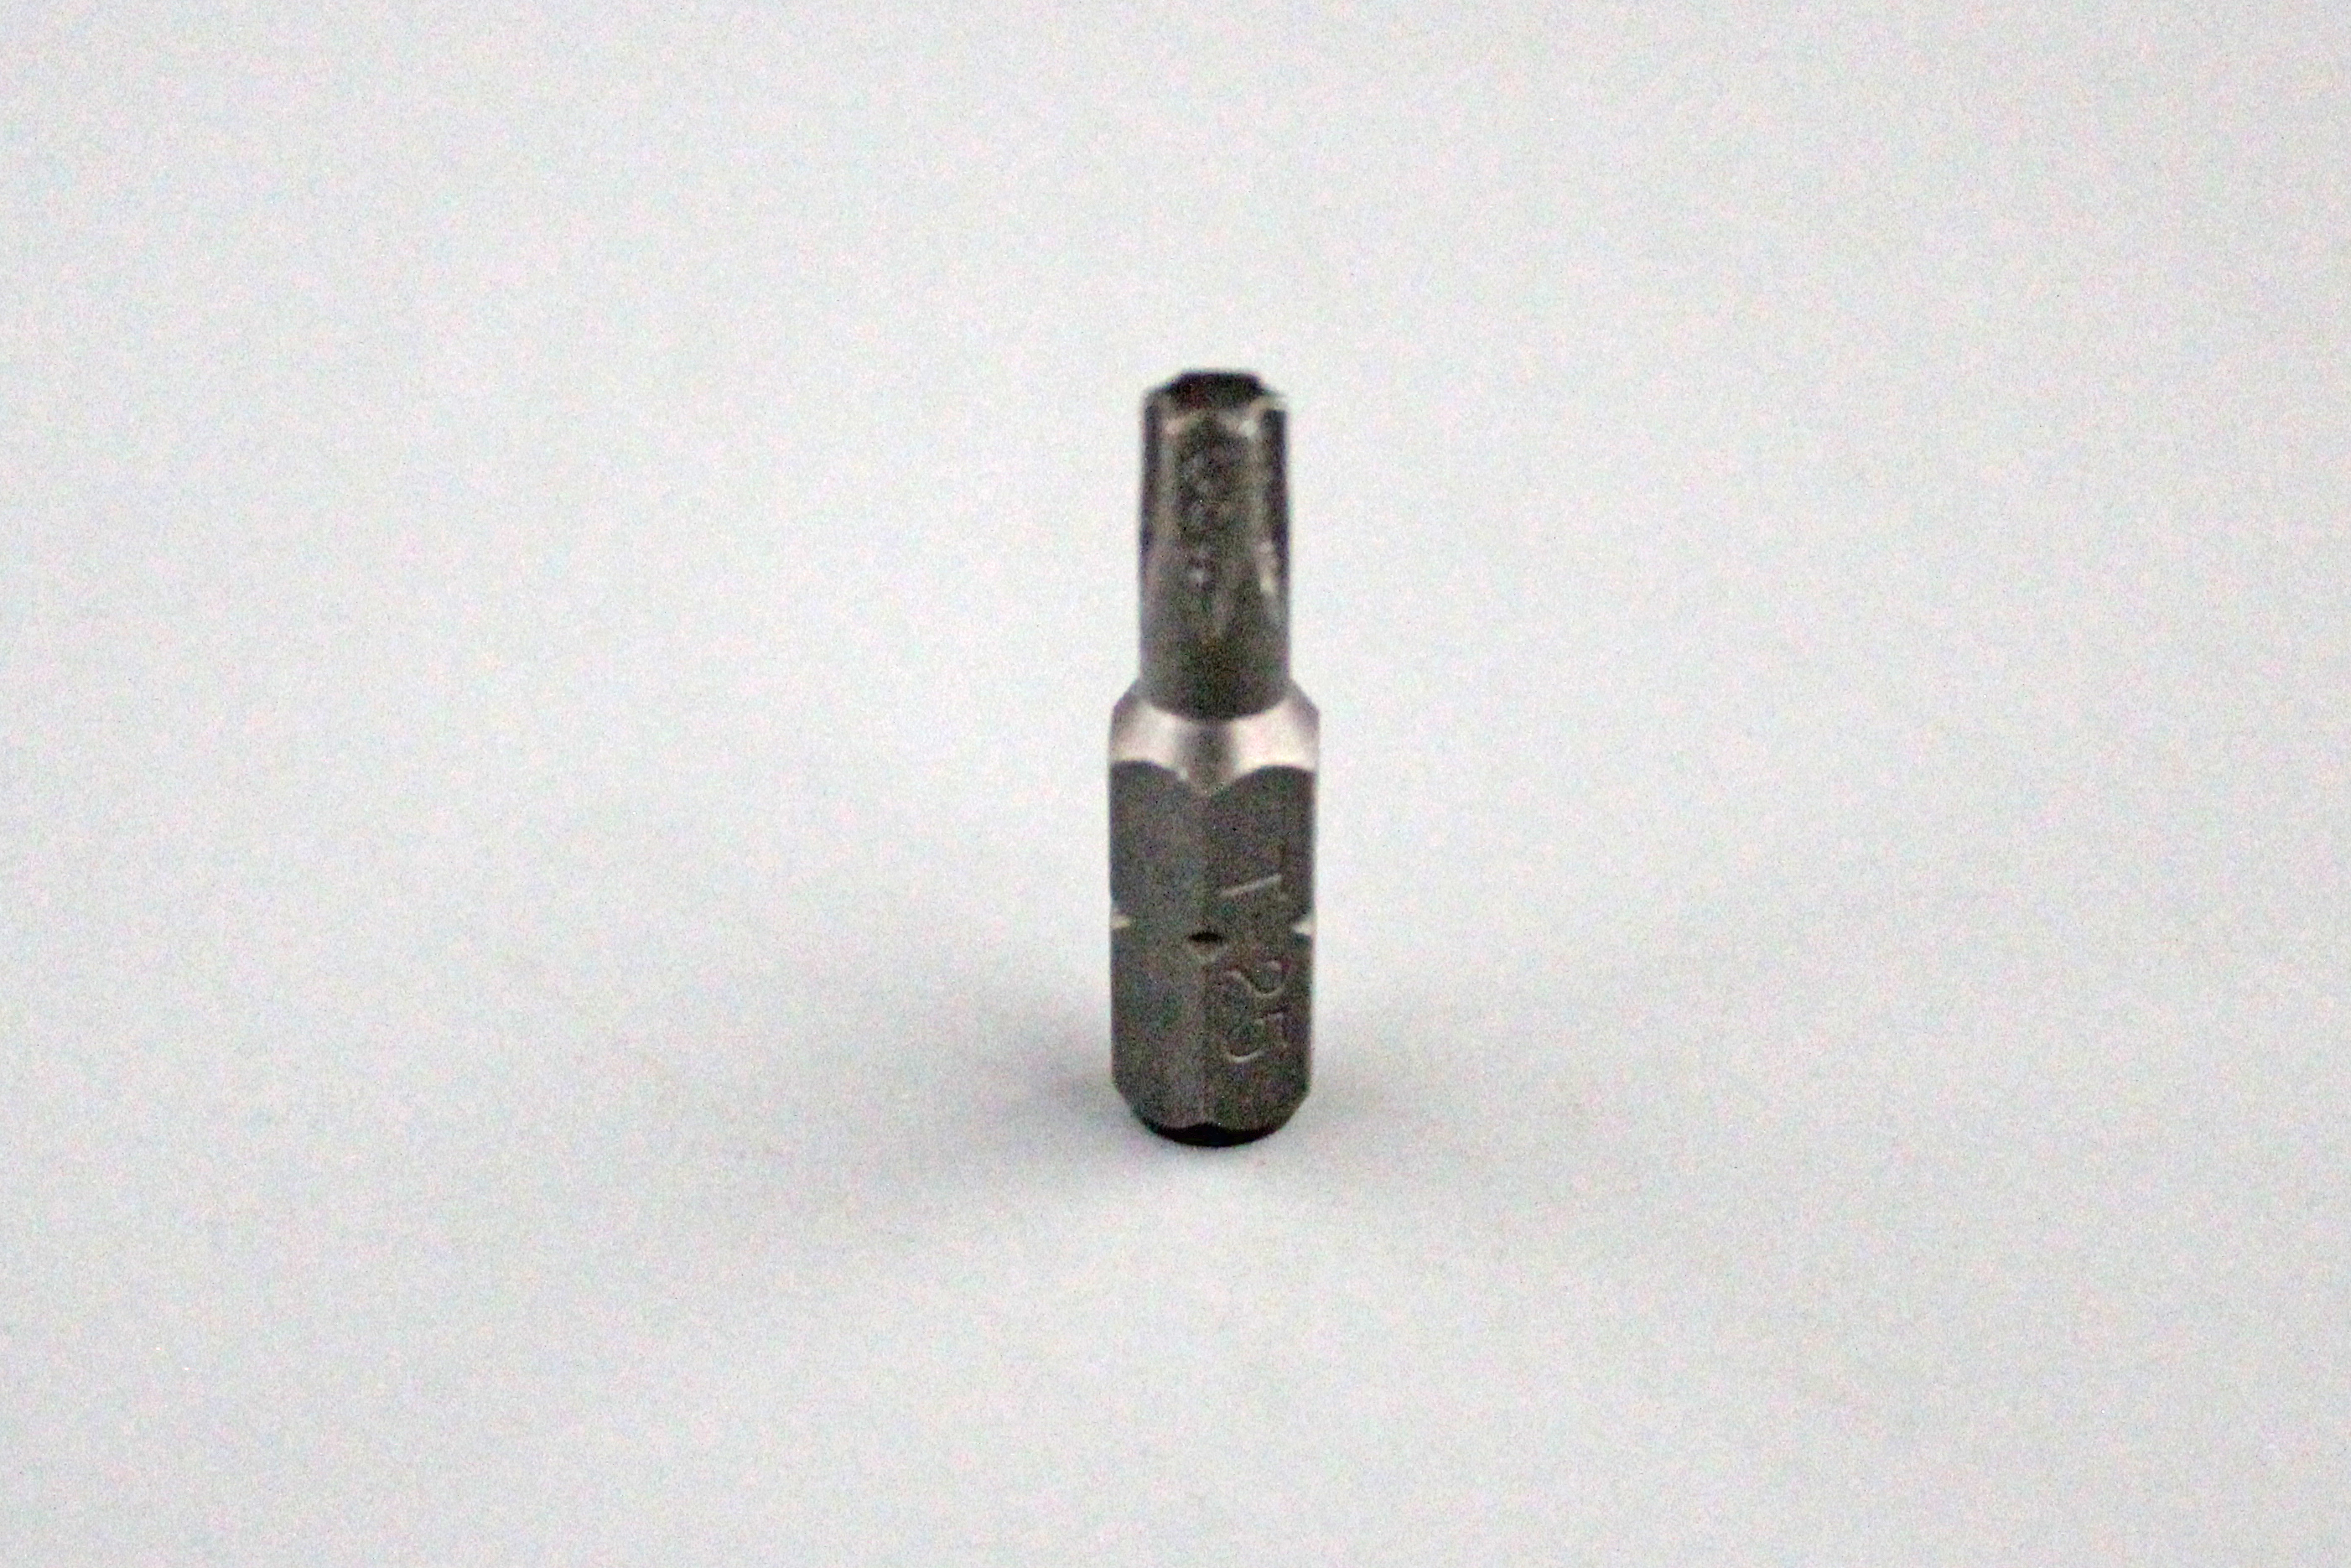 T25 Torx Drive Bit - CLEARANCE SAFETY COVERS